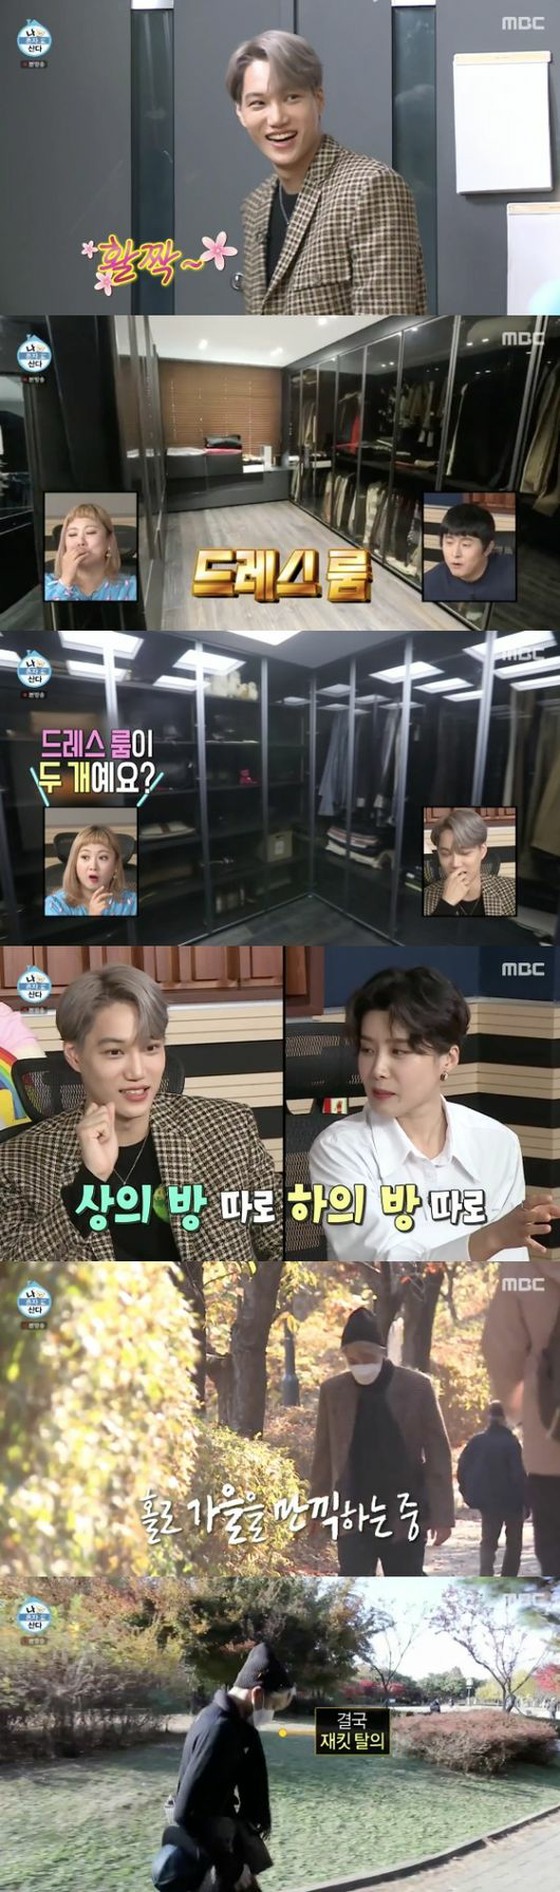 KAI (EXO), the reason why there are two dresings rooms for a single men ... "Full set when going for a walk or PC cafe"